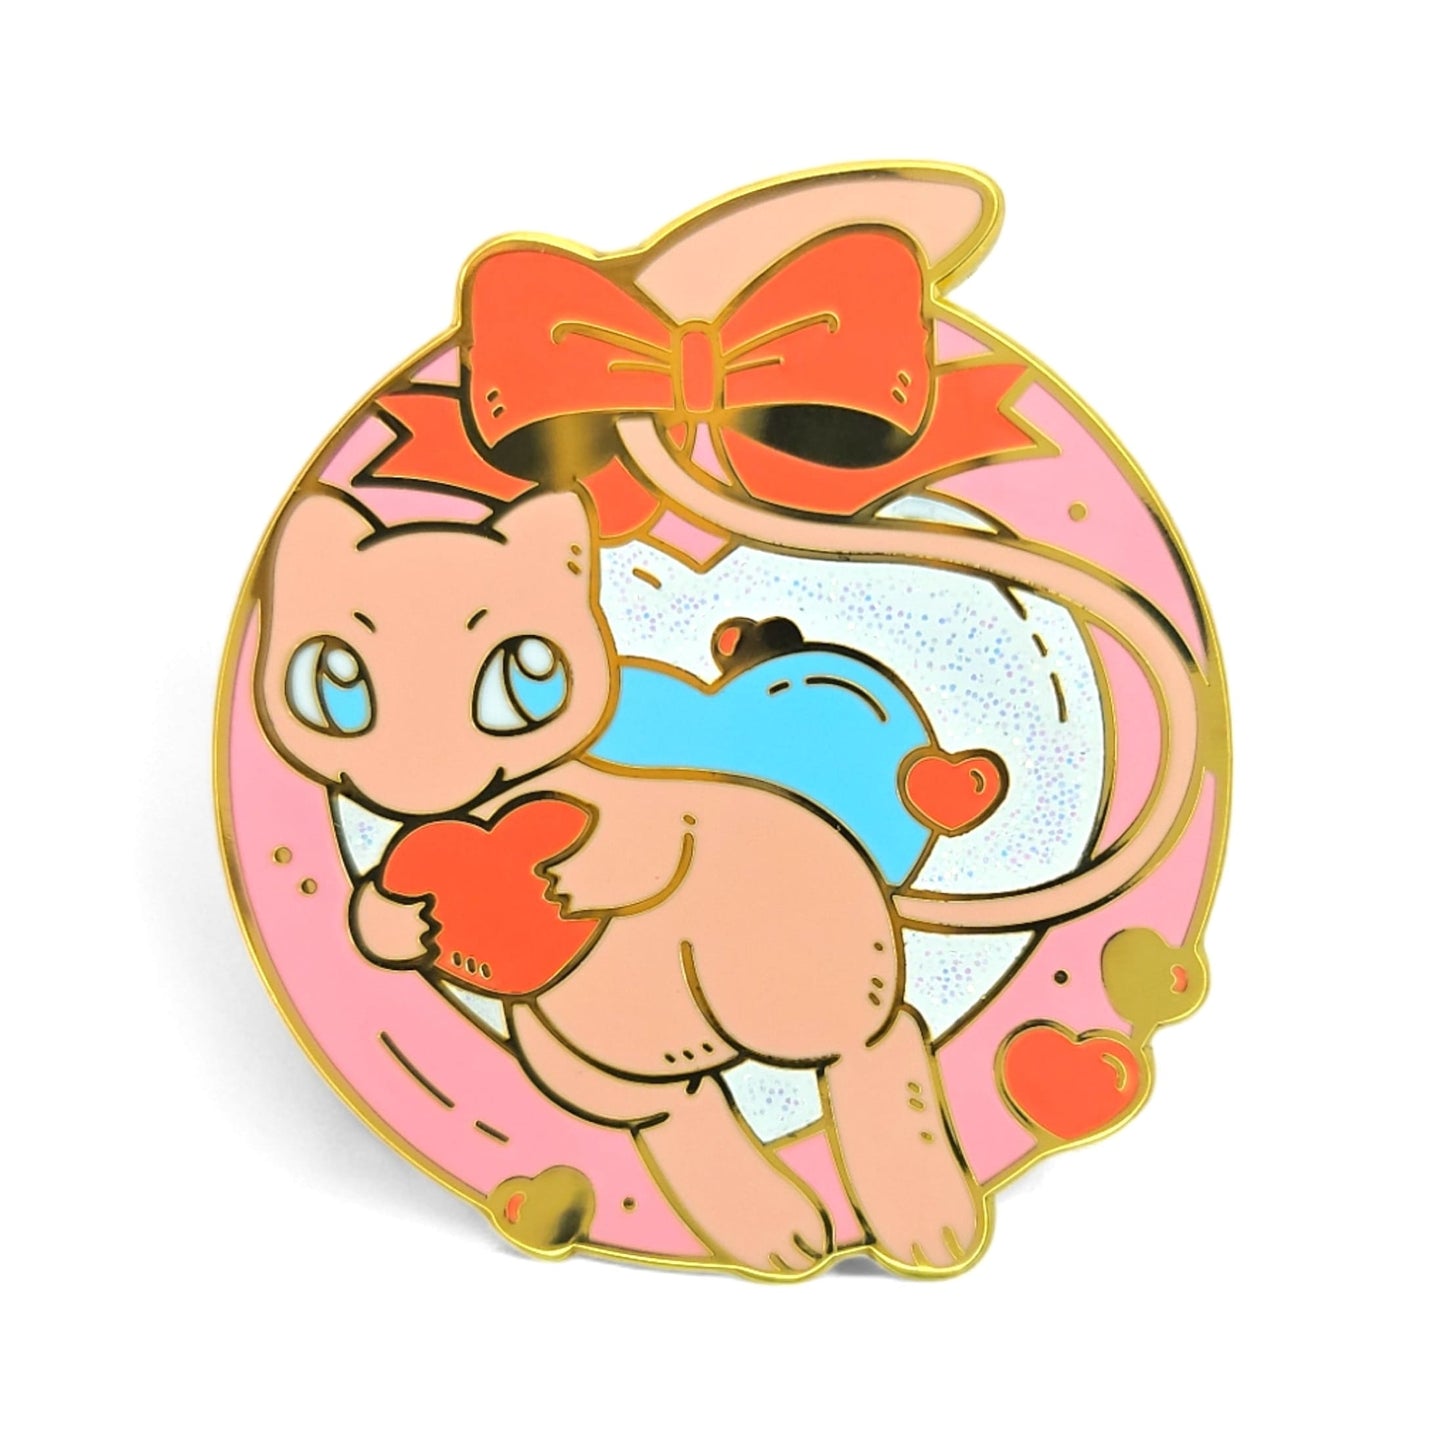 Pokémon Mew Have a Heart Hard Enamel Pin from Confetti Kitty, Only 15